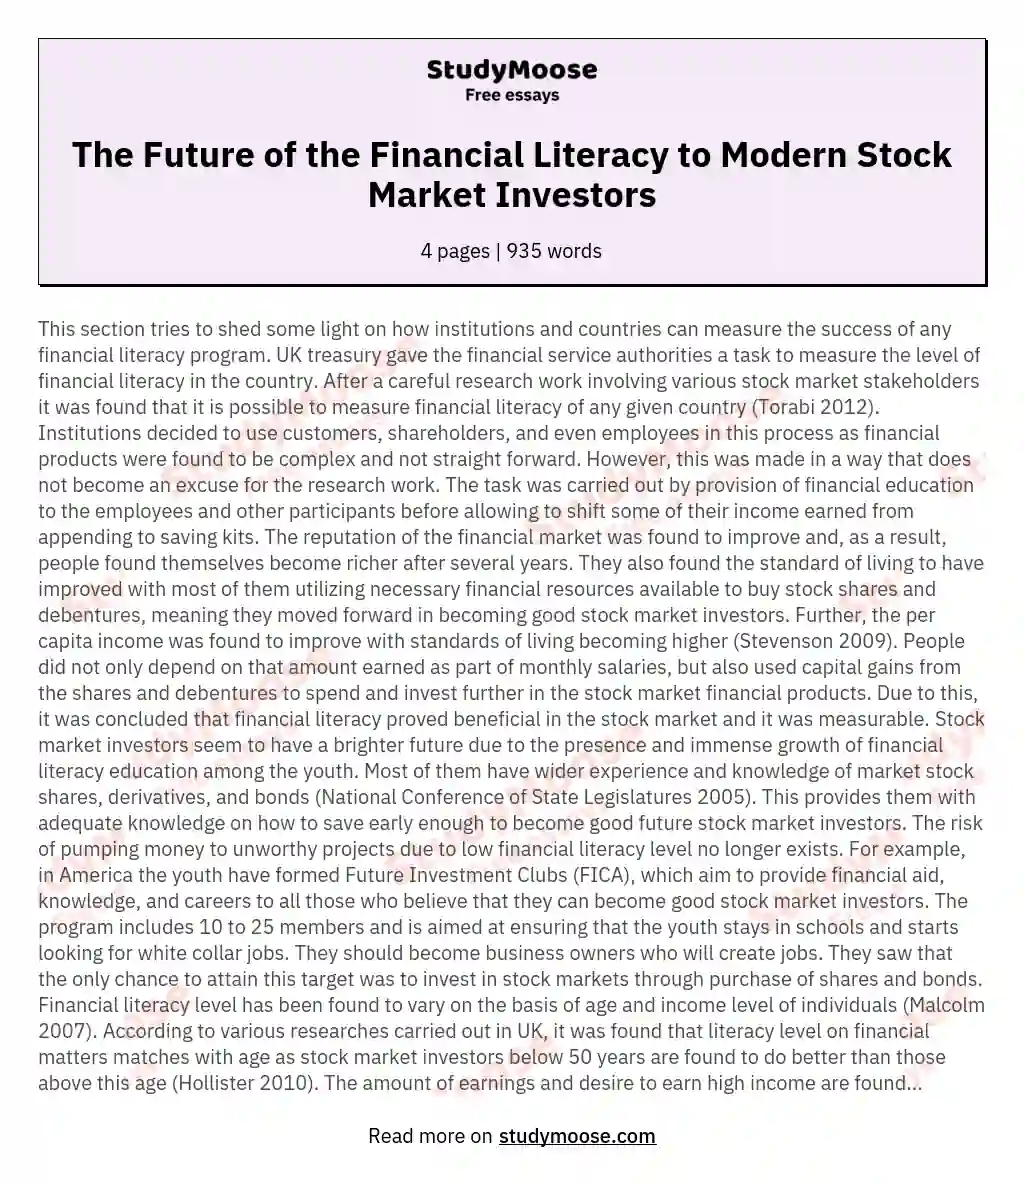 The Future of the Financial Literacy to Modern Stock Market Investors essay